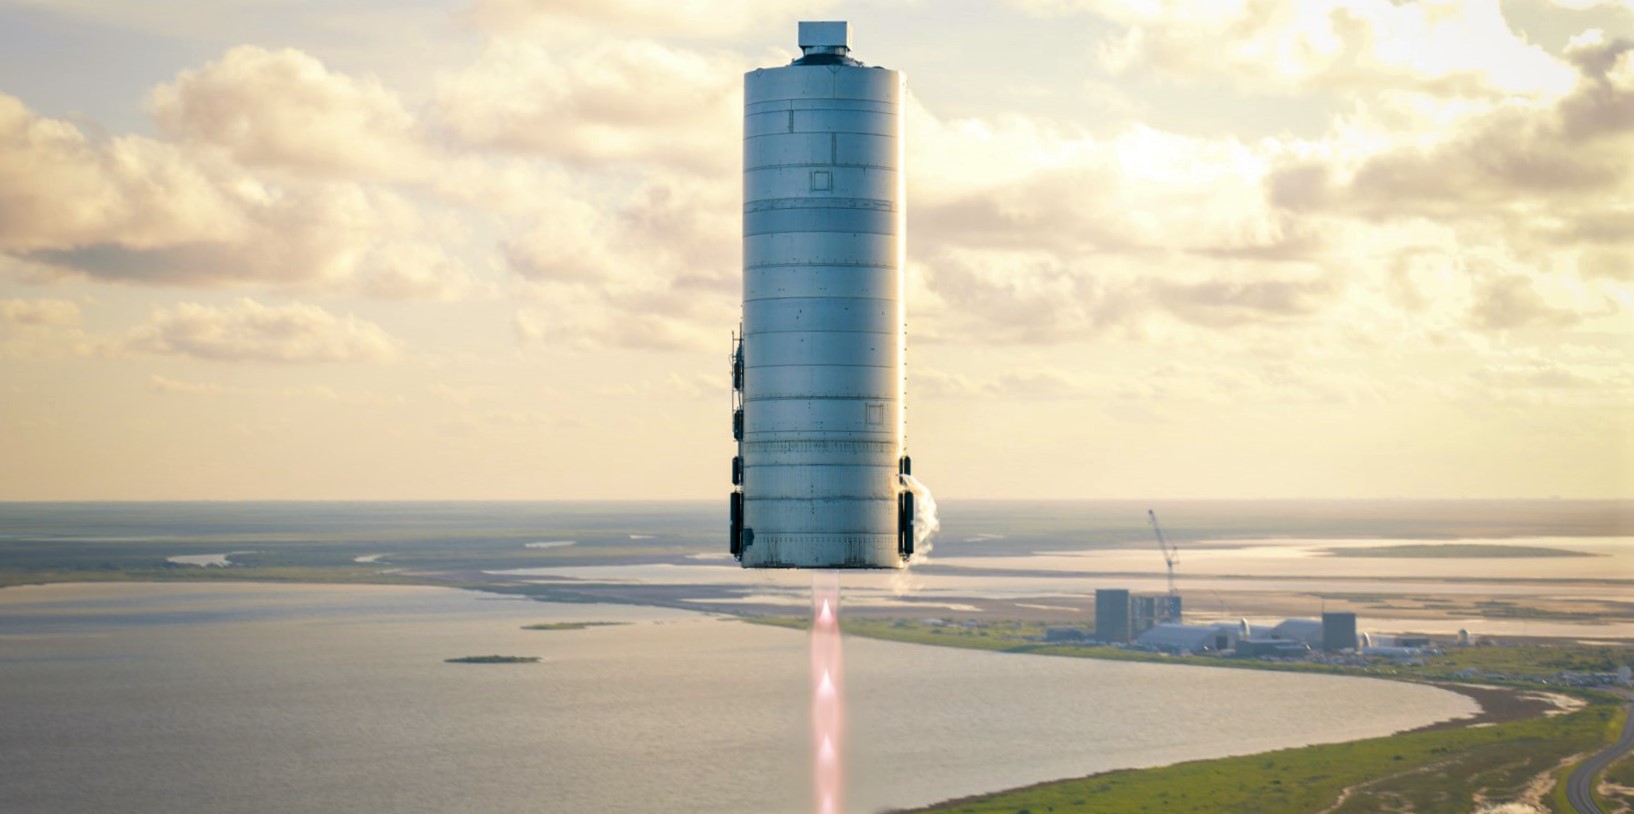 SpaceX’s Starship poised to launch Texas’ space industry into new era